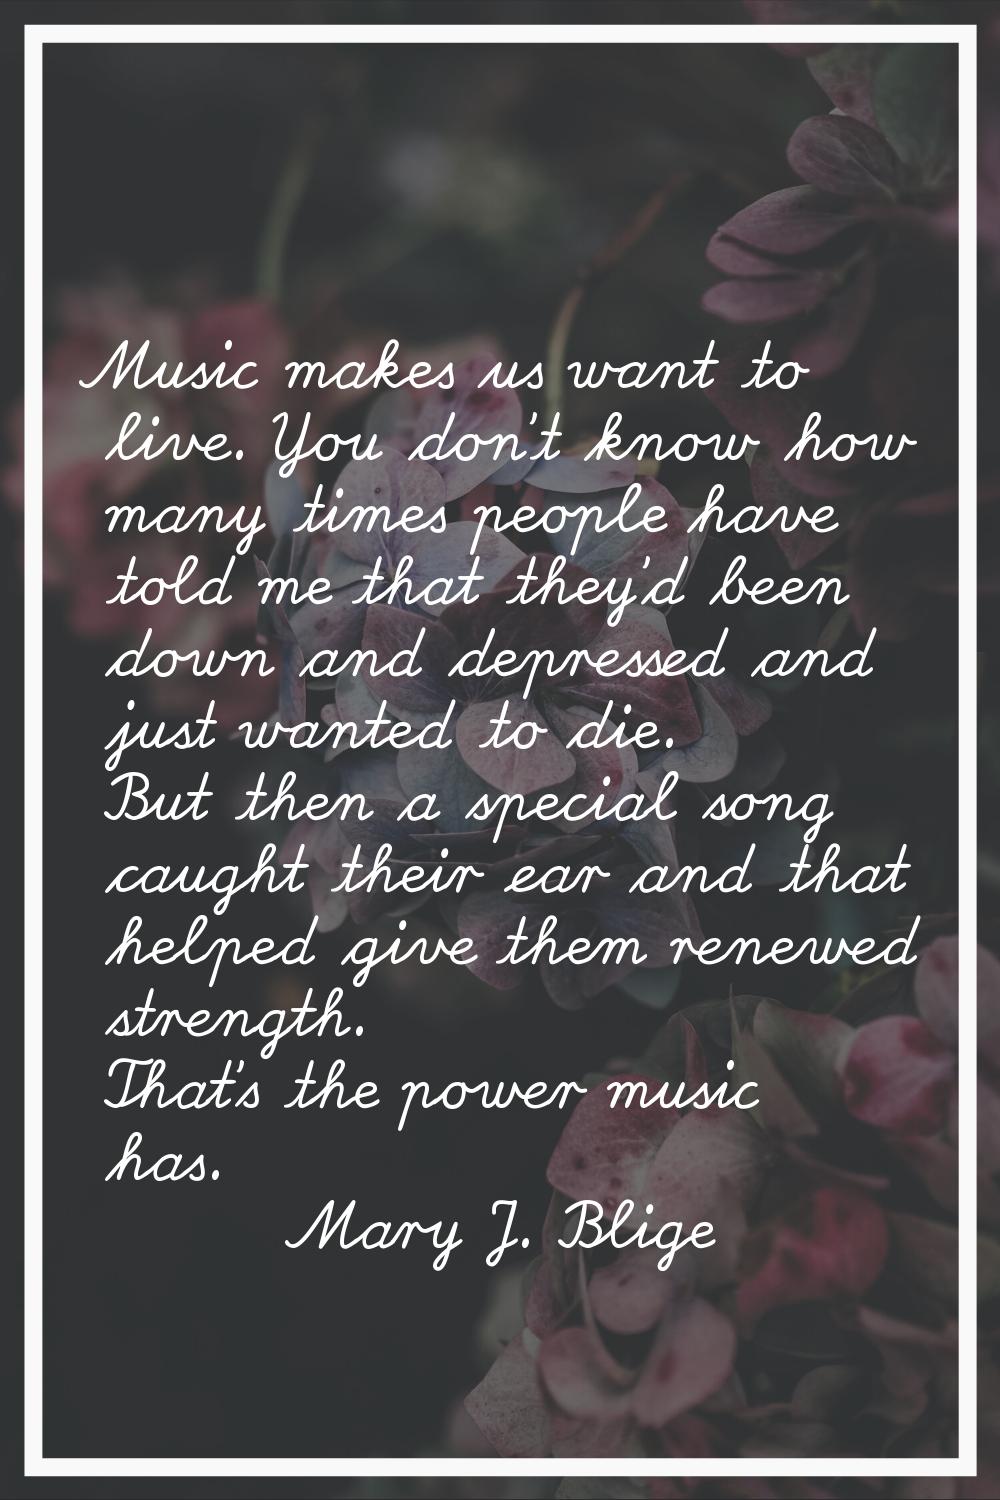 Music makes us want to live. You don't know how many times people have told me that they'd been dow